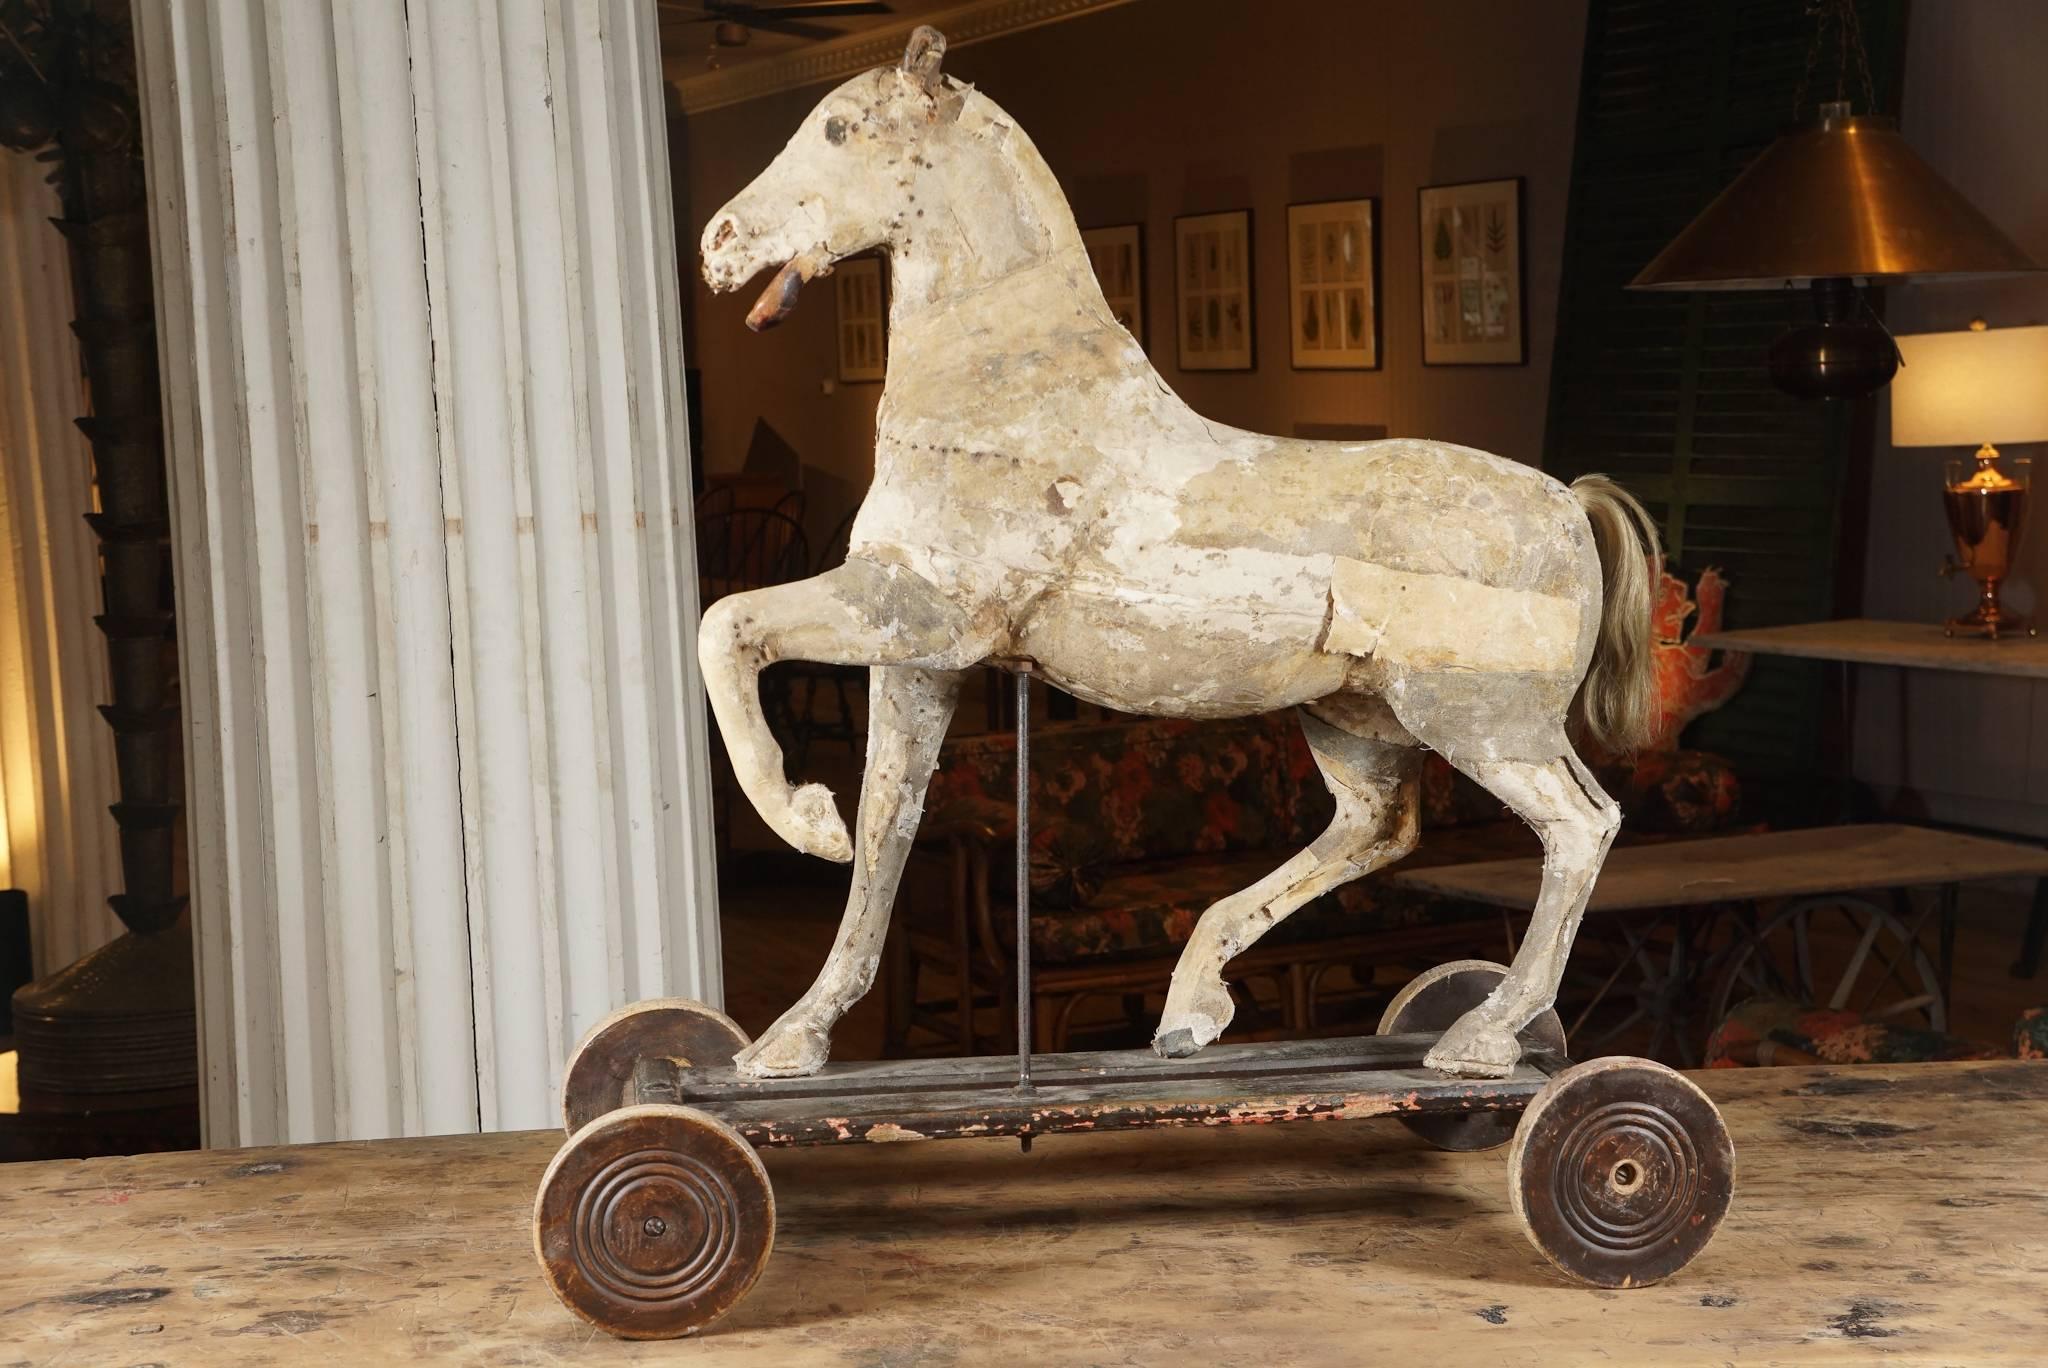 18th century sculpture of a prancing horse, exquisite form, ancient velum colored surface of hide and nail construction, wood carved hooves and jaw, leather ear, white horsehair tail, on wood wheeled base in original brown painted worn surface.